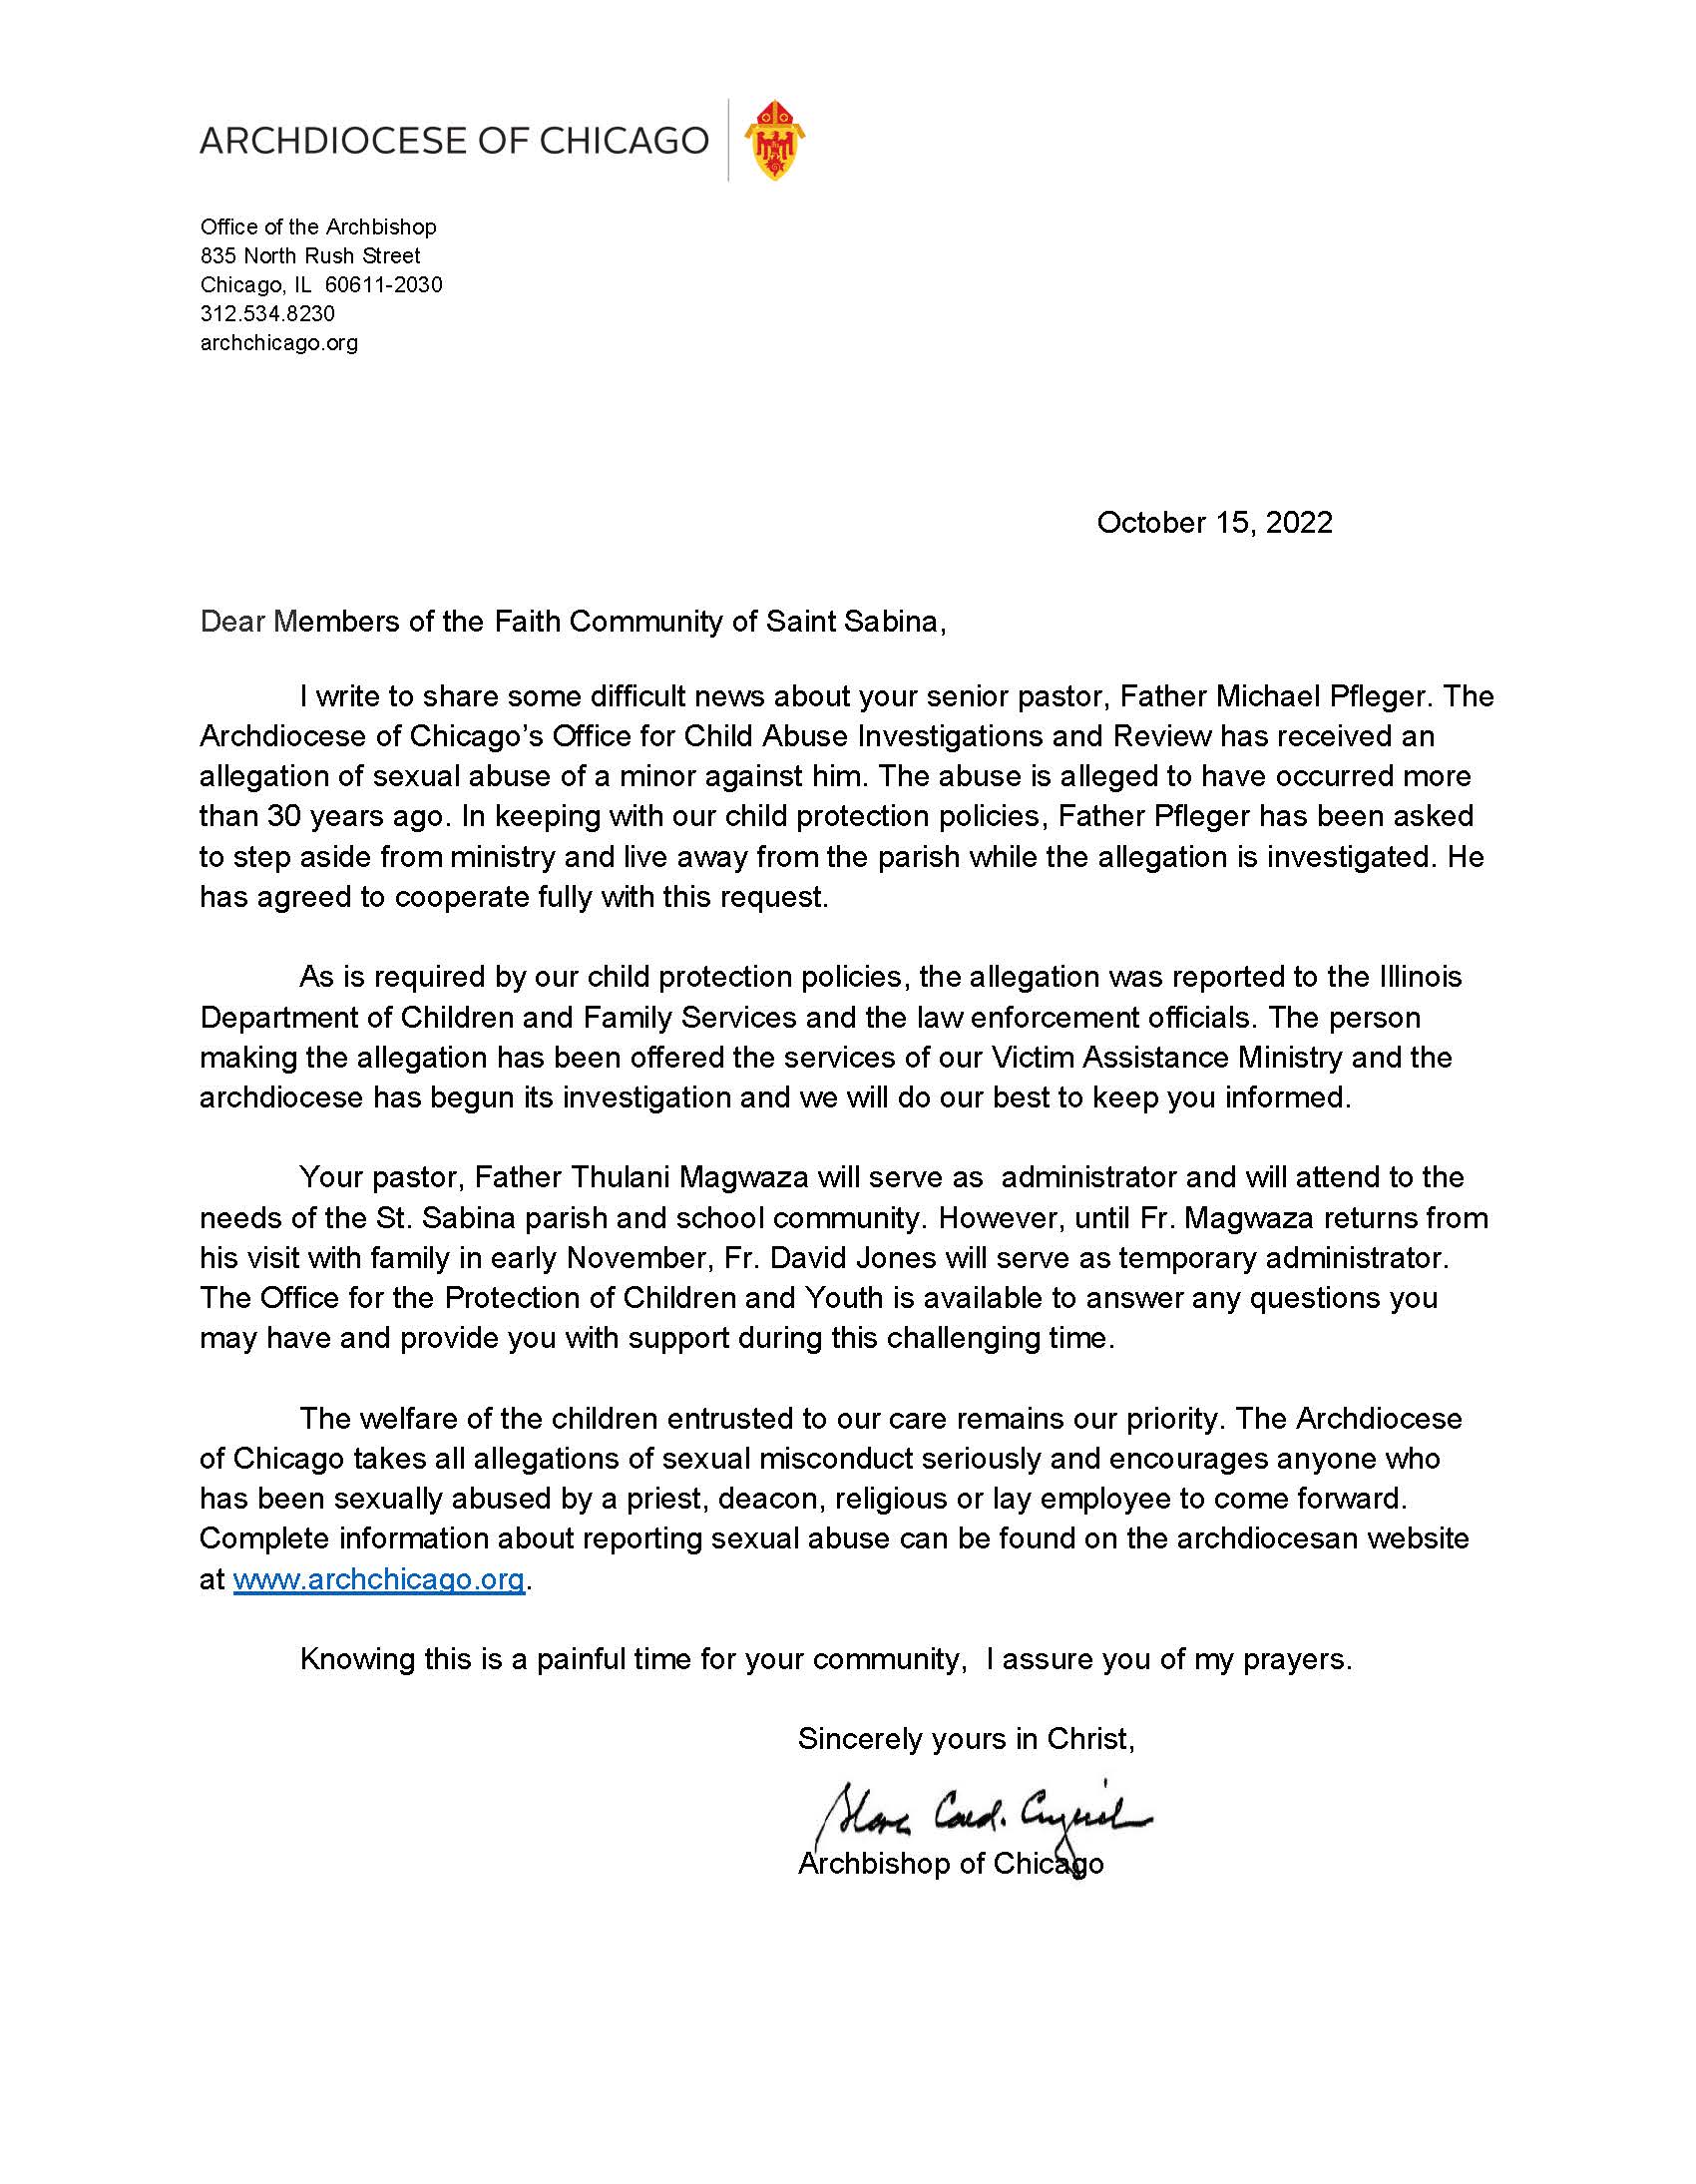 10.15.2022 Letter notifying Saint Sabina Faith Community of allegation against Father PflegerFINAL